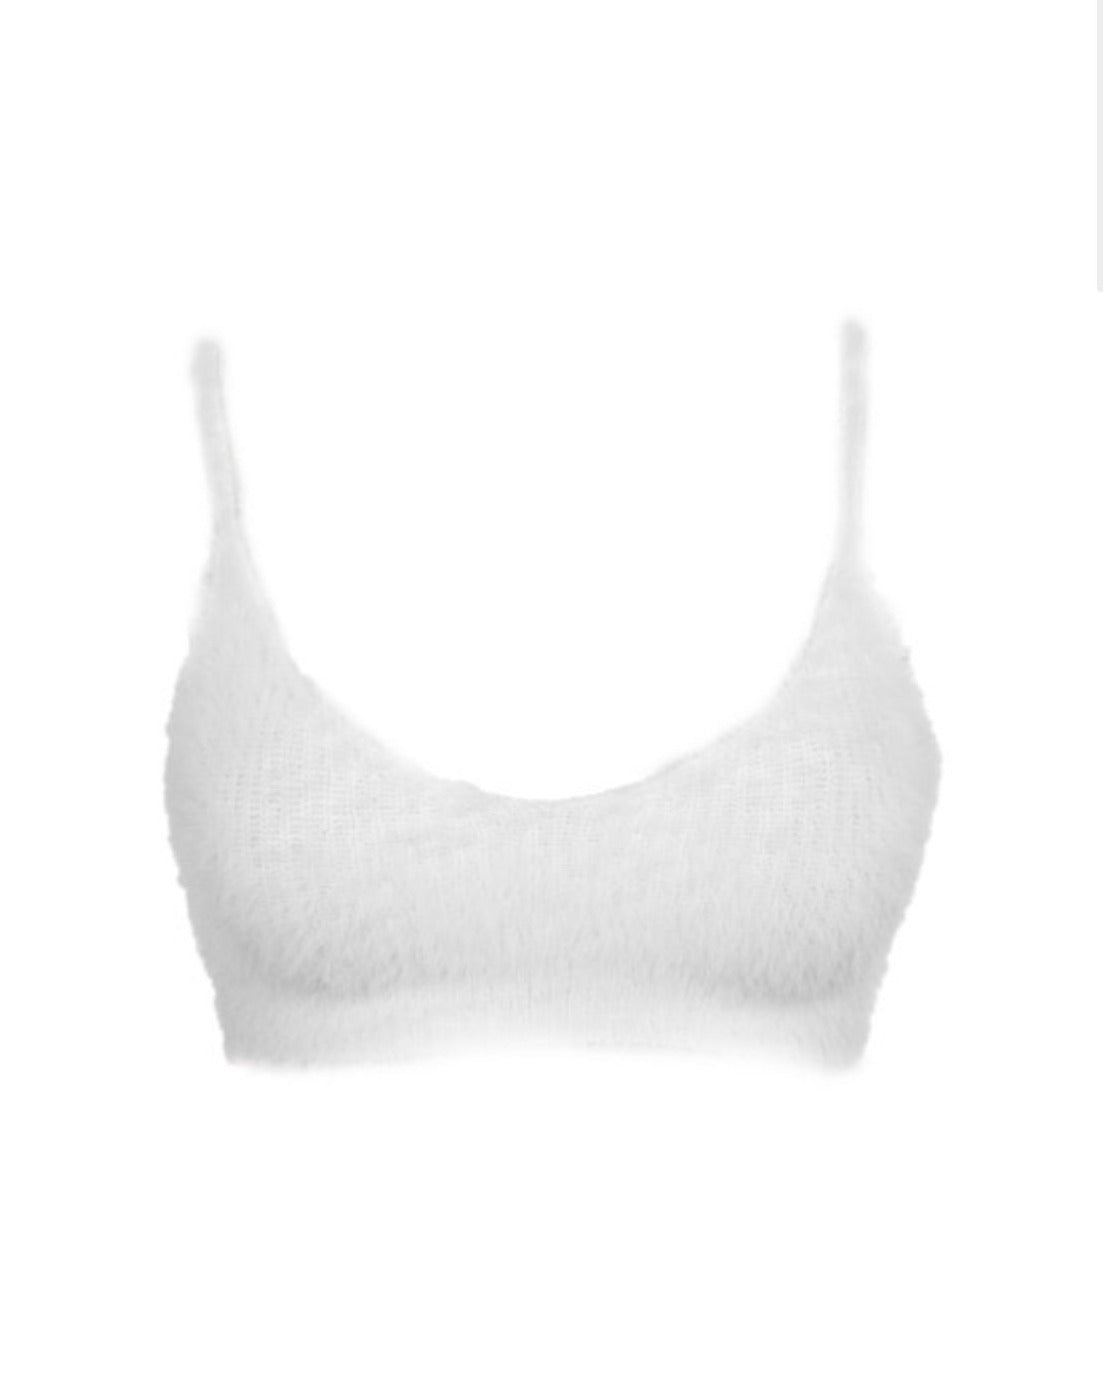 Close-up view of the delicate spaghetti straps and fuzzy material on the Gia White Crop Top, emphasizing its cozy design.